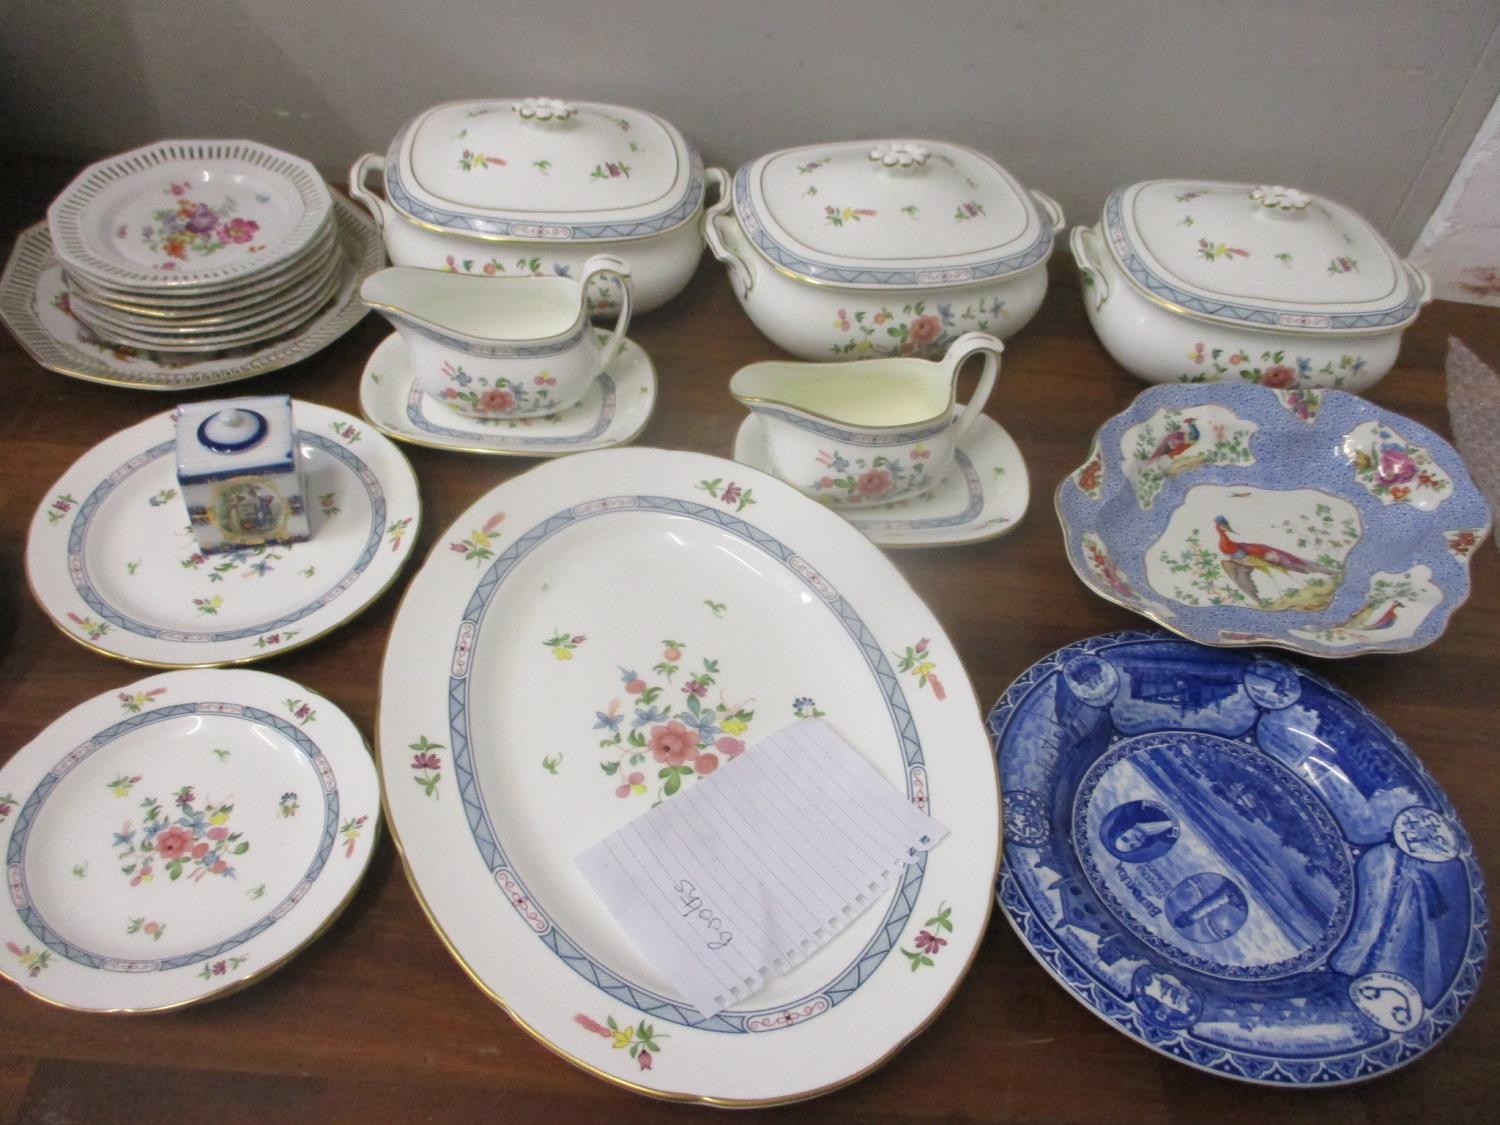 Mixed china to include a Wedgwood part dinner service, Booths, Schumann plates, and other items